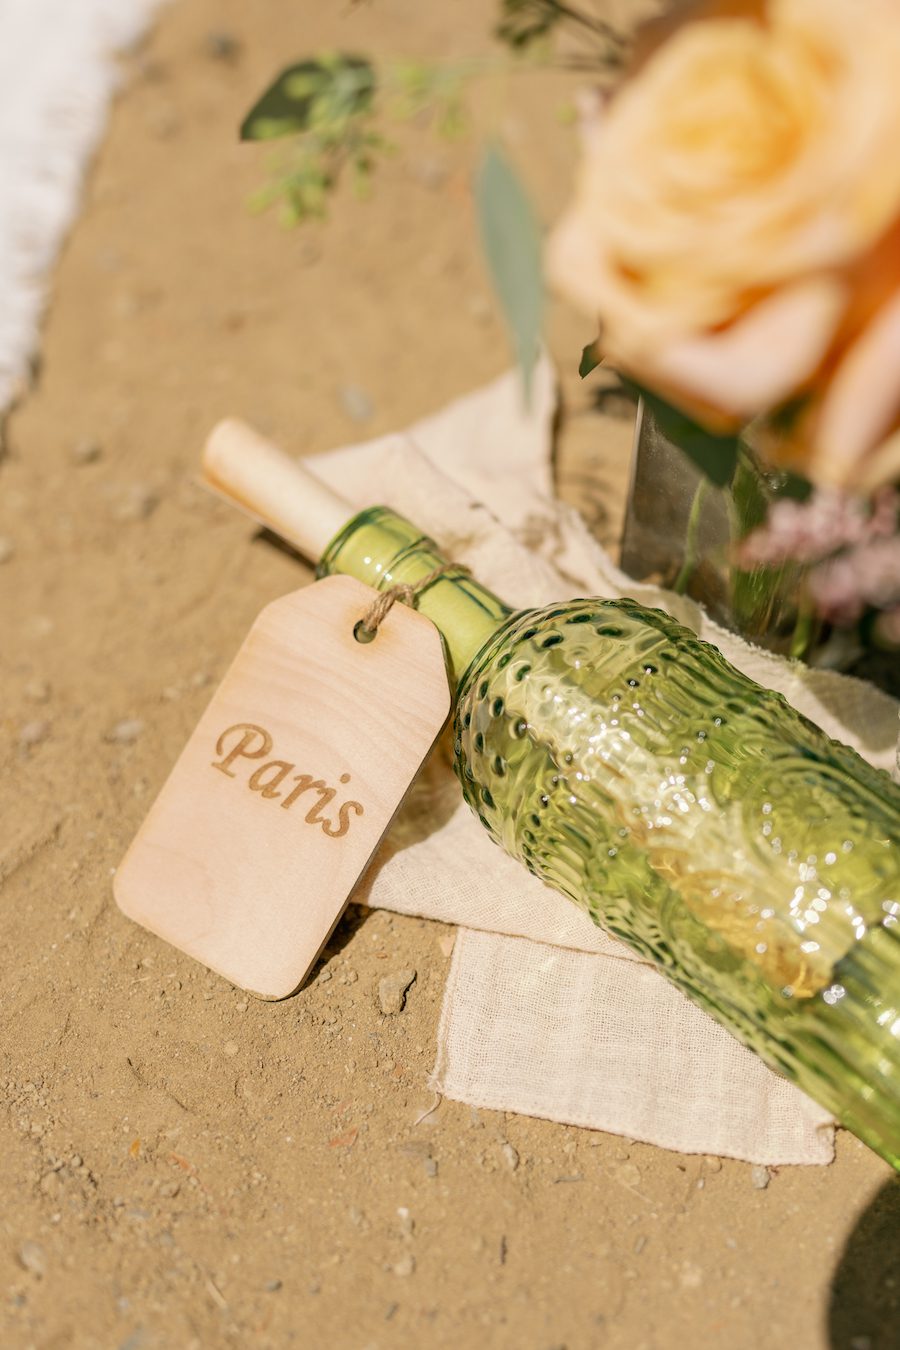 custom details from this private picnic proposal on Catalina Island